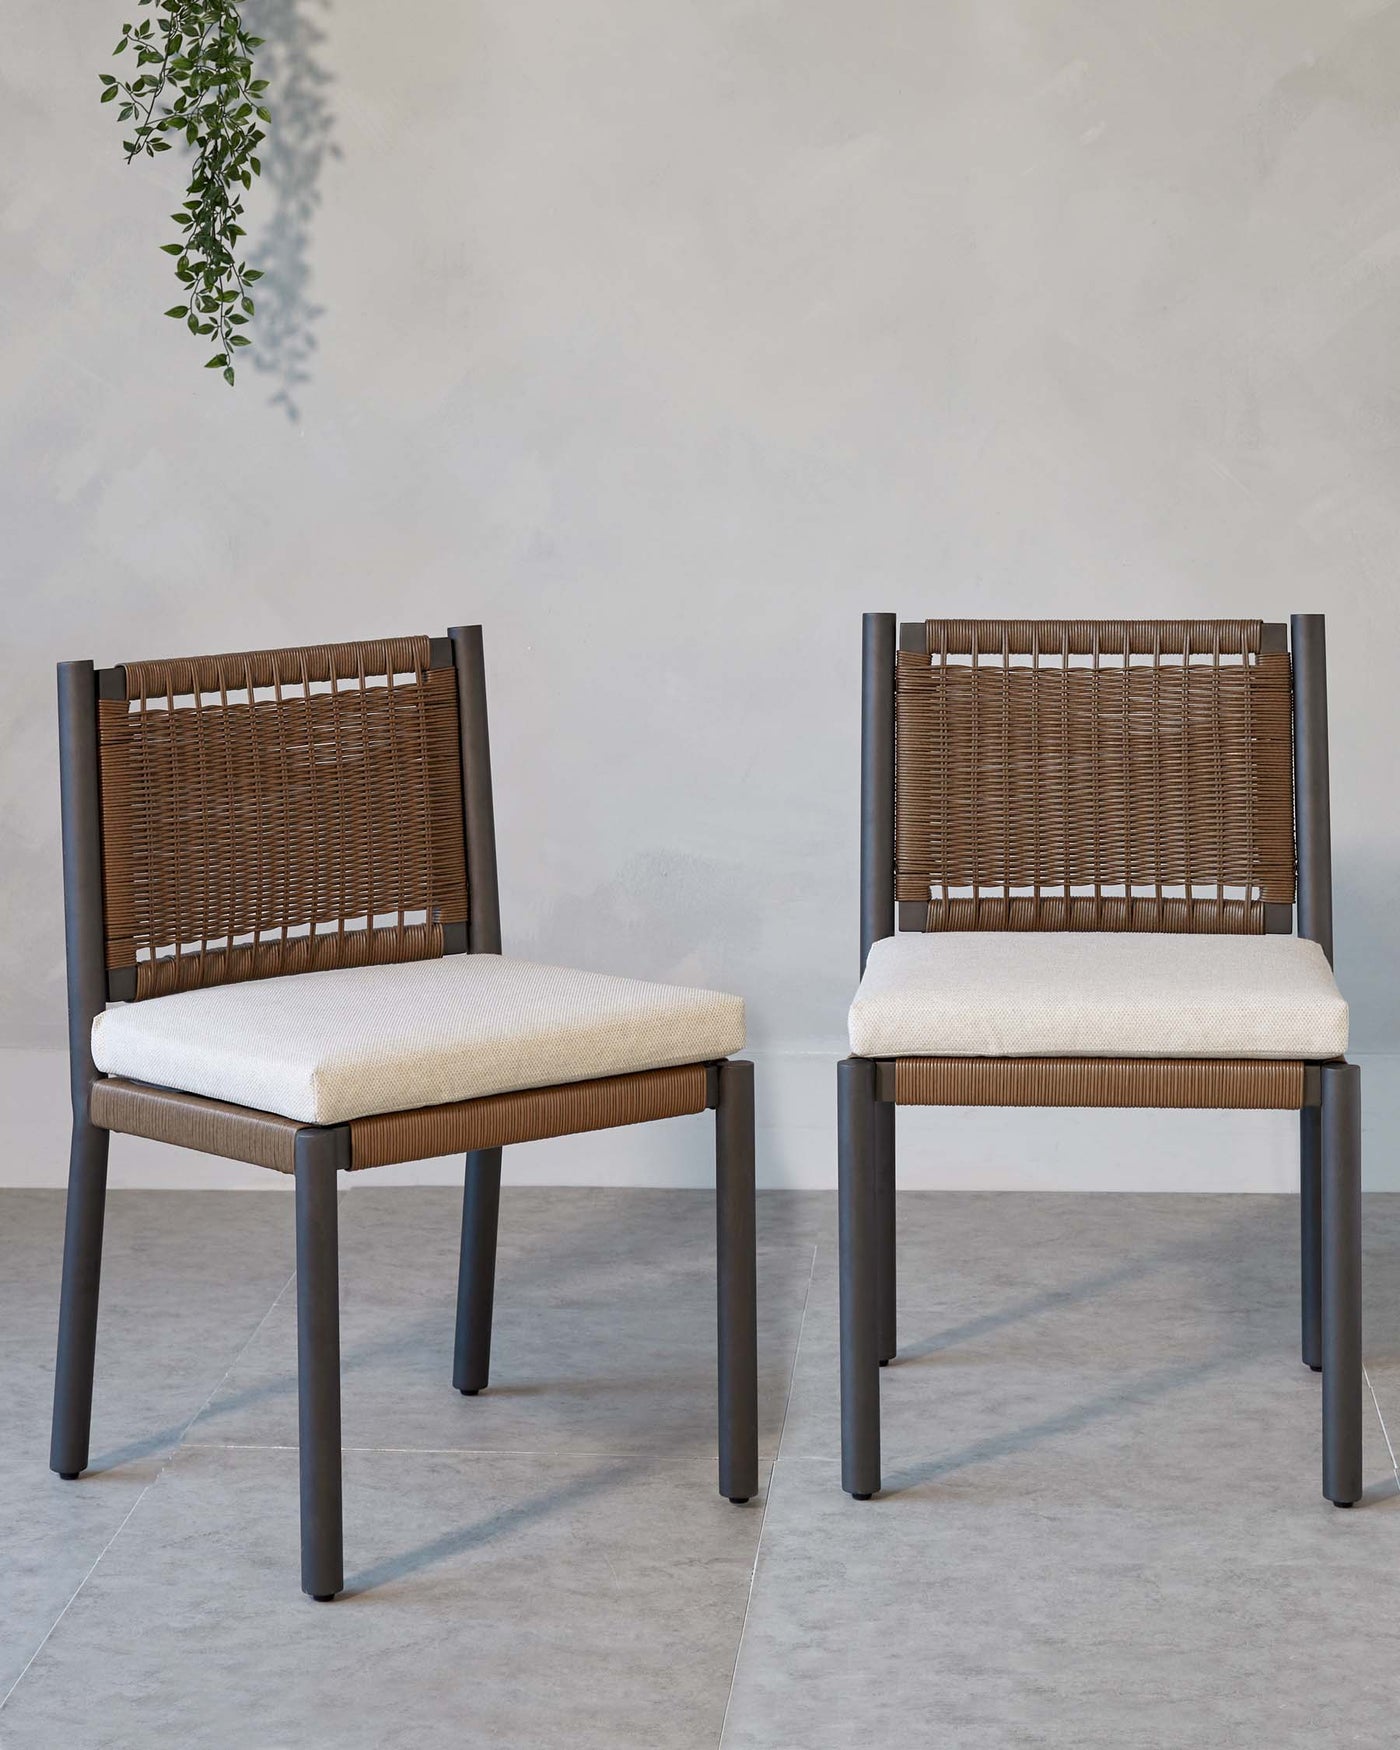 Two modern dining chairs with dark metal frames and tan woven backrests, complemented by off-white cushioned seats, standing on a smooth grey floor against a neutral wall with a trailing green plant in the top left corner.